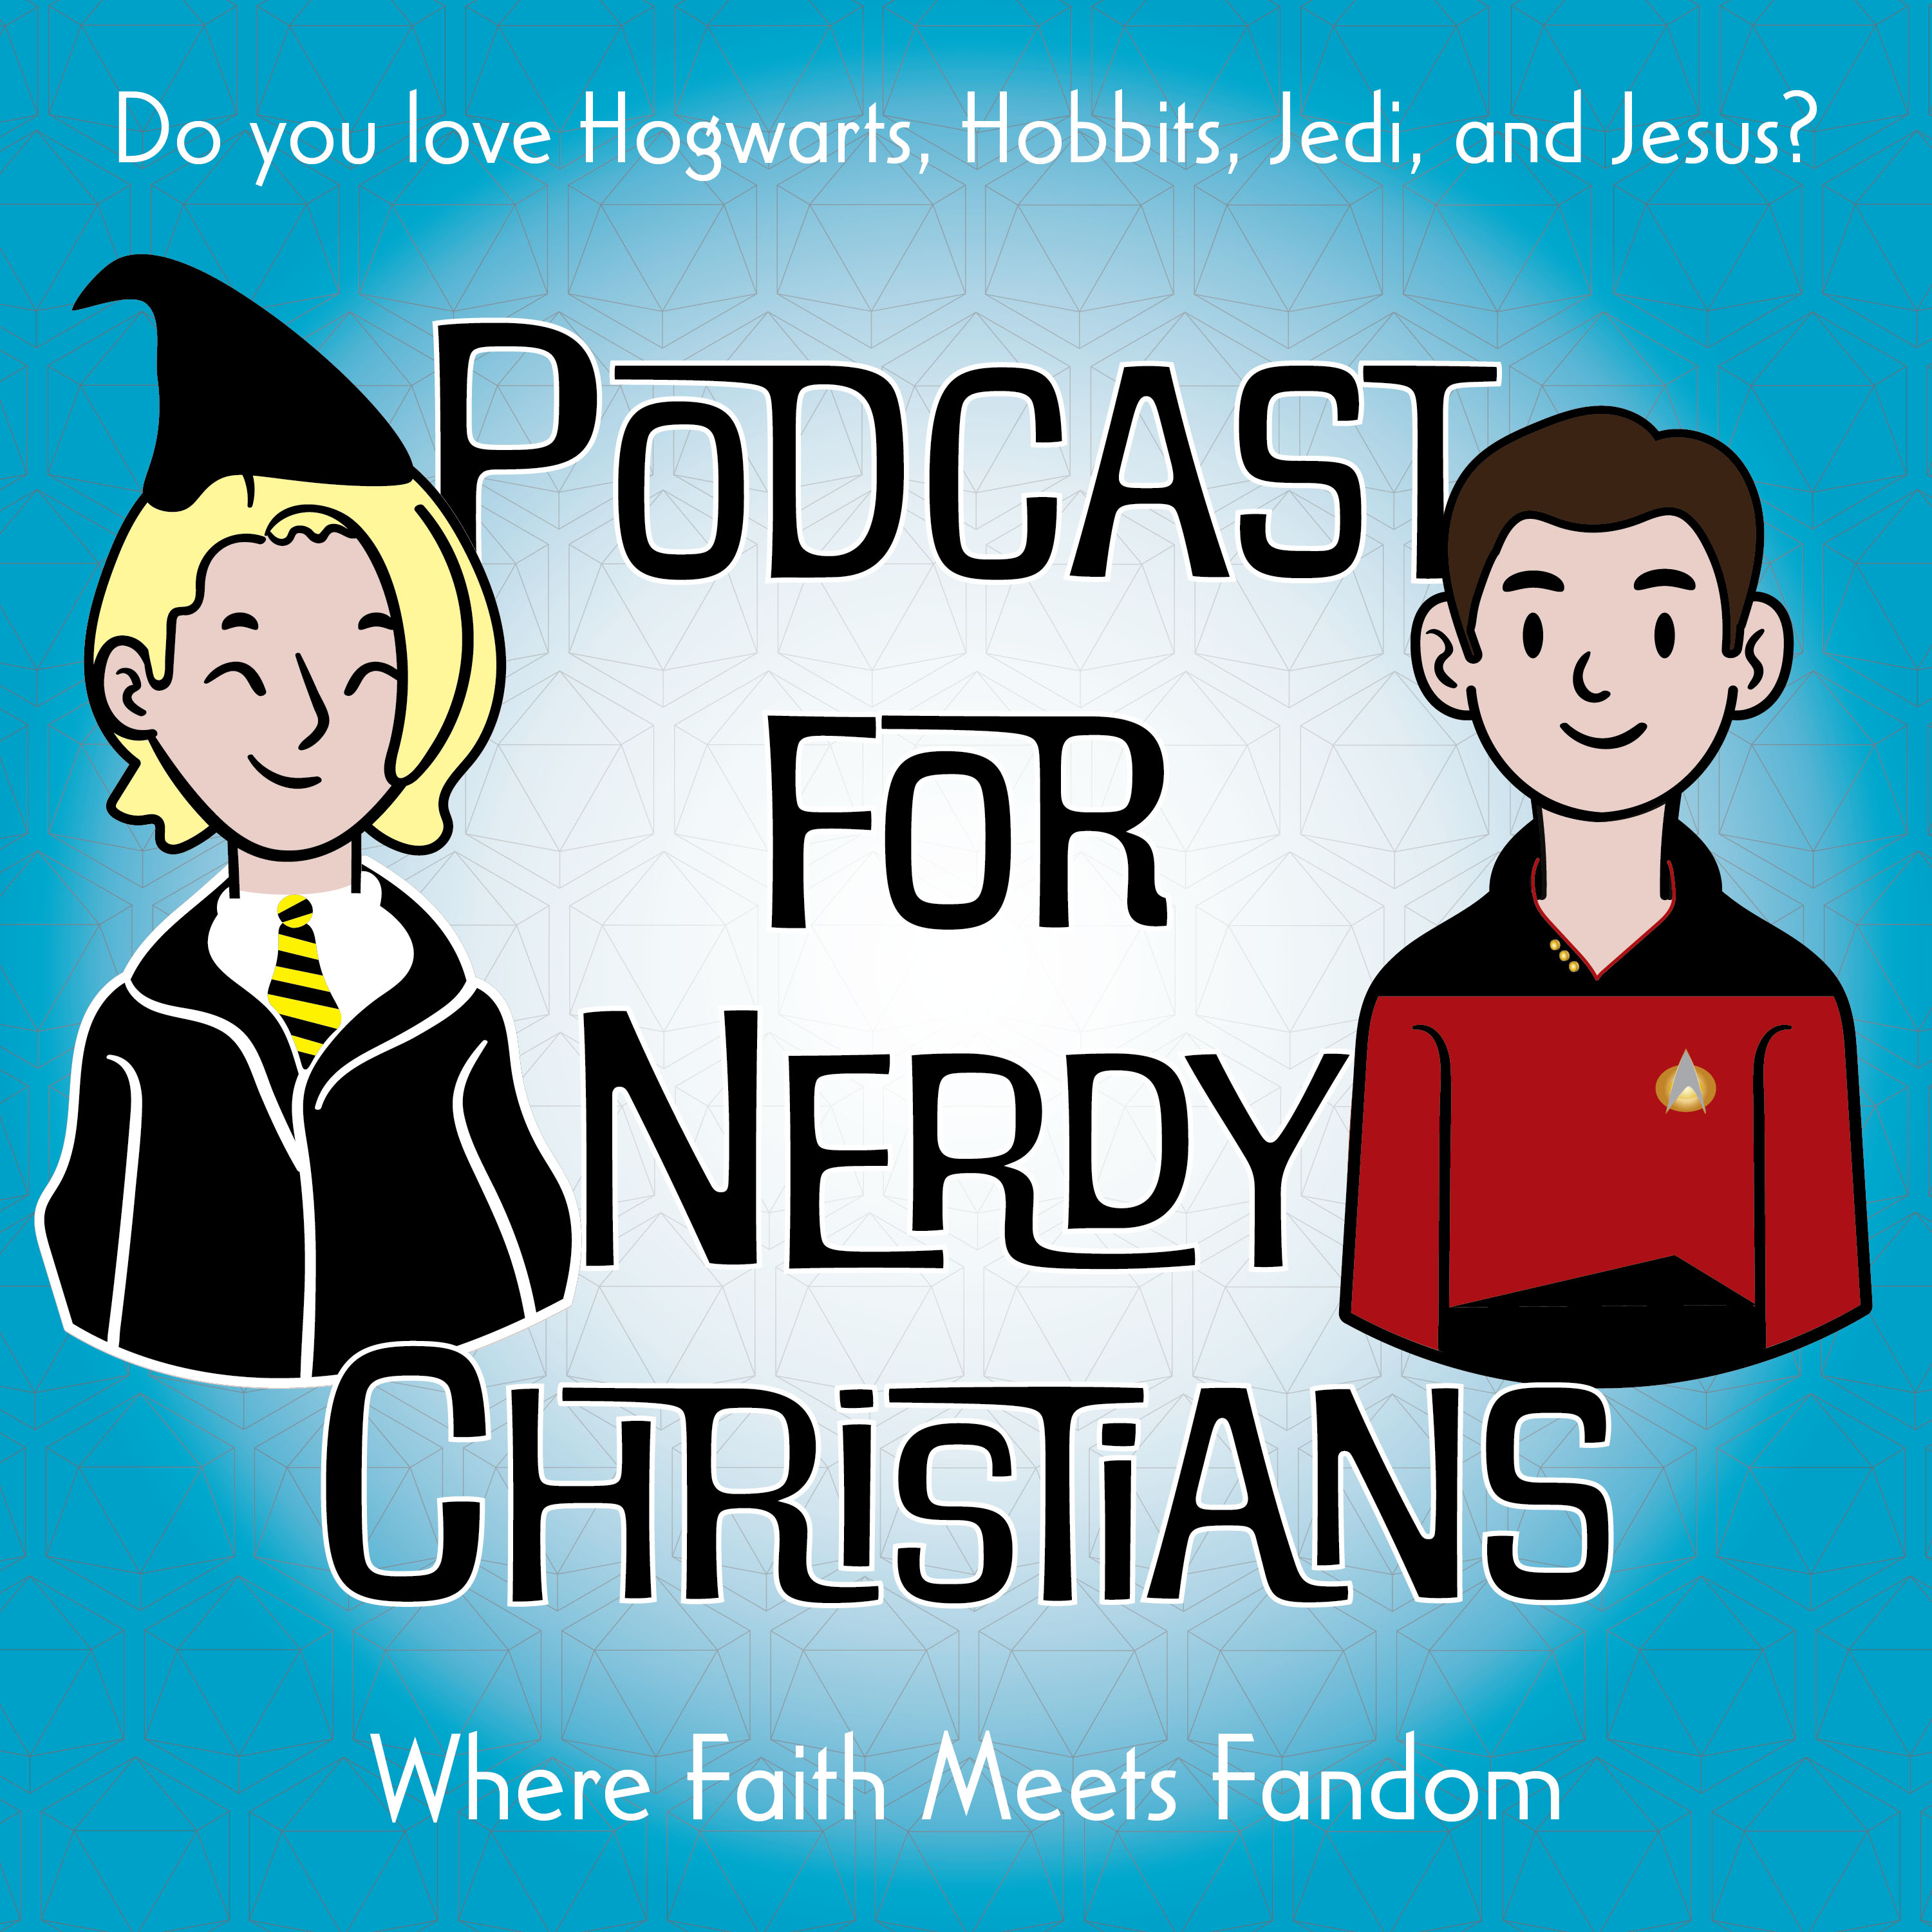 Podcast for Nerdy Christians